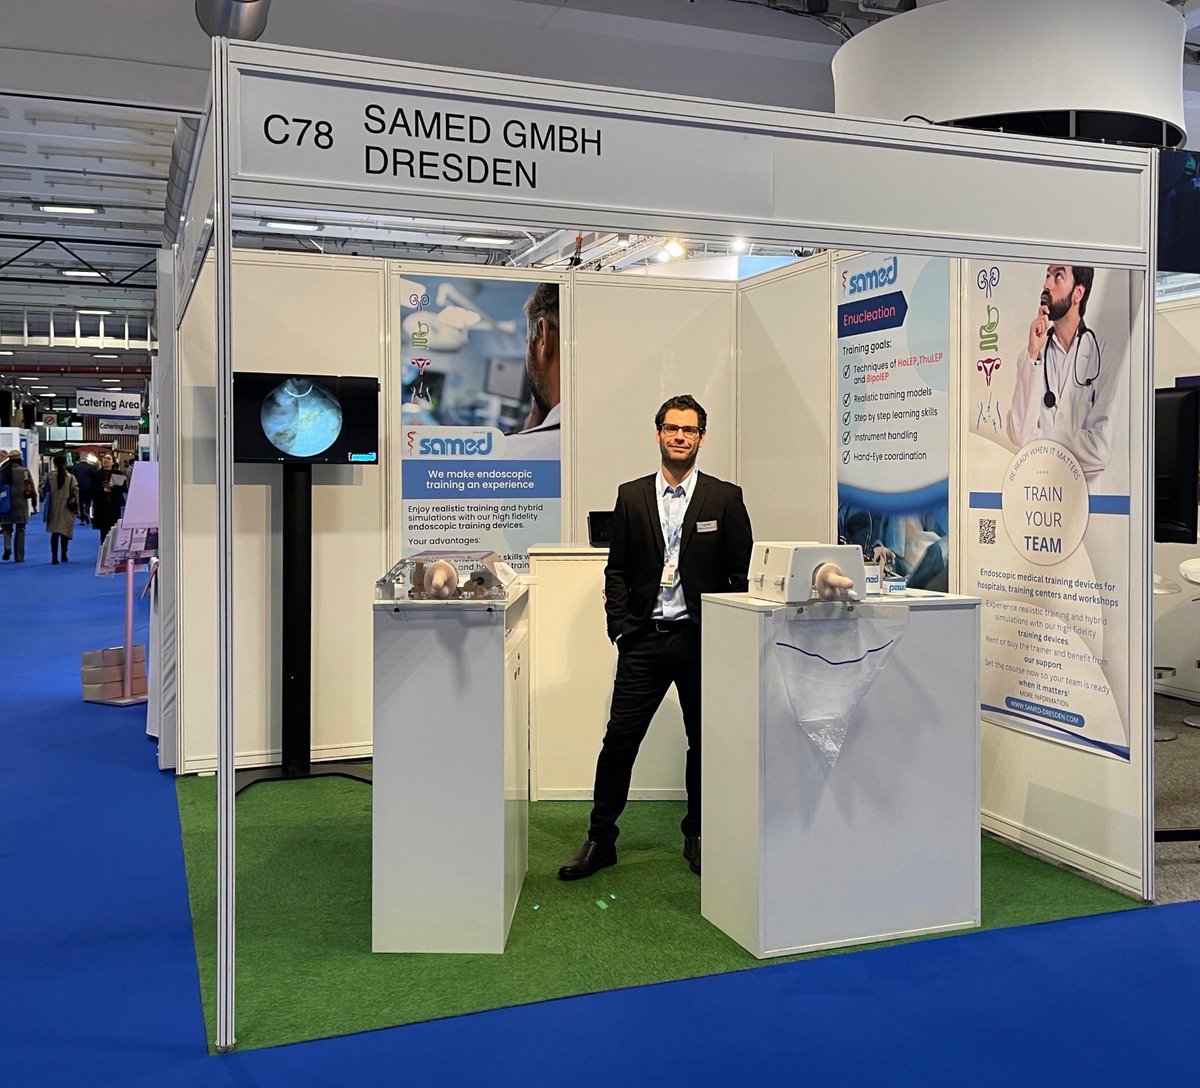 #EAU24 has started! A warmly welcome on our booth C78! Our team will present you our new innovations for your endoscopic education and training.Don‘t forget to ask about our sophisticated #Enucleation training model for your realistic training. #TrainYourTeam #Medicaleducation